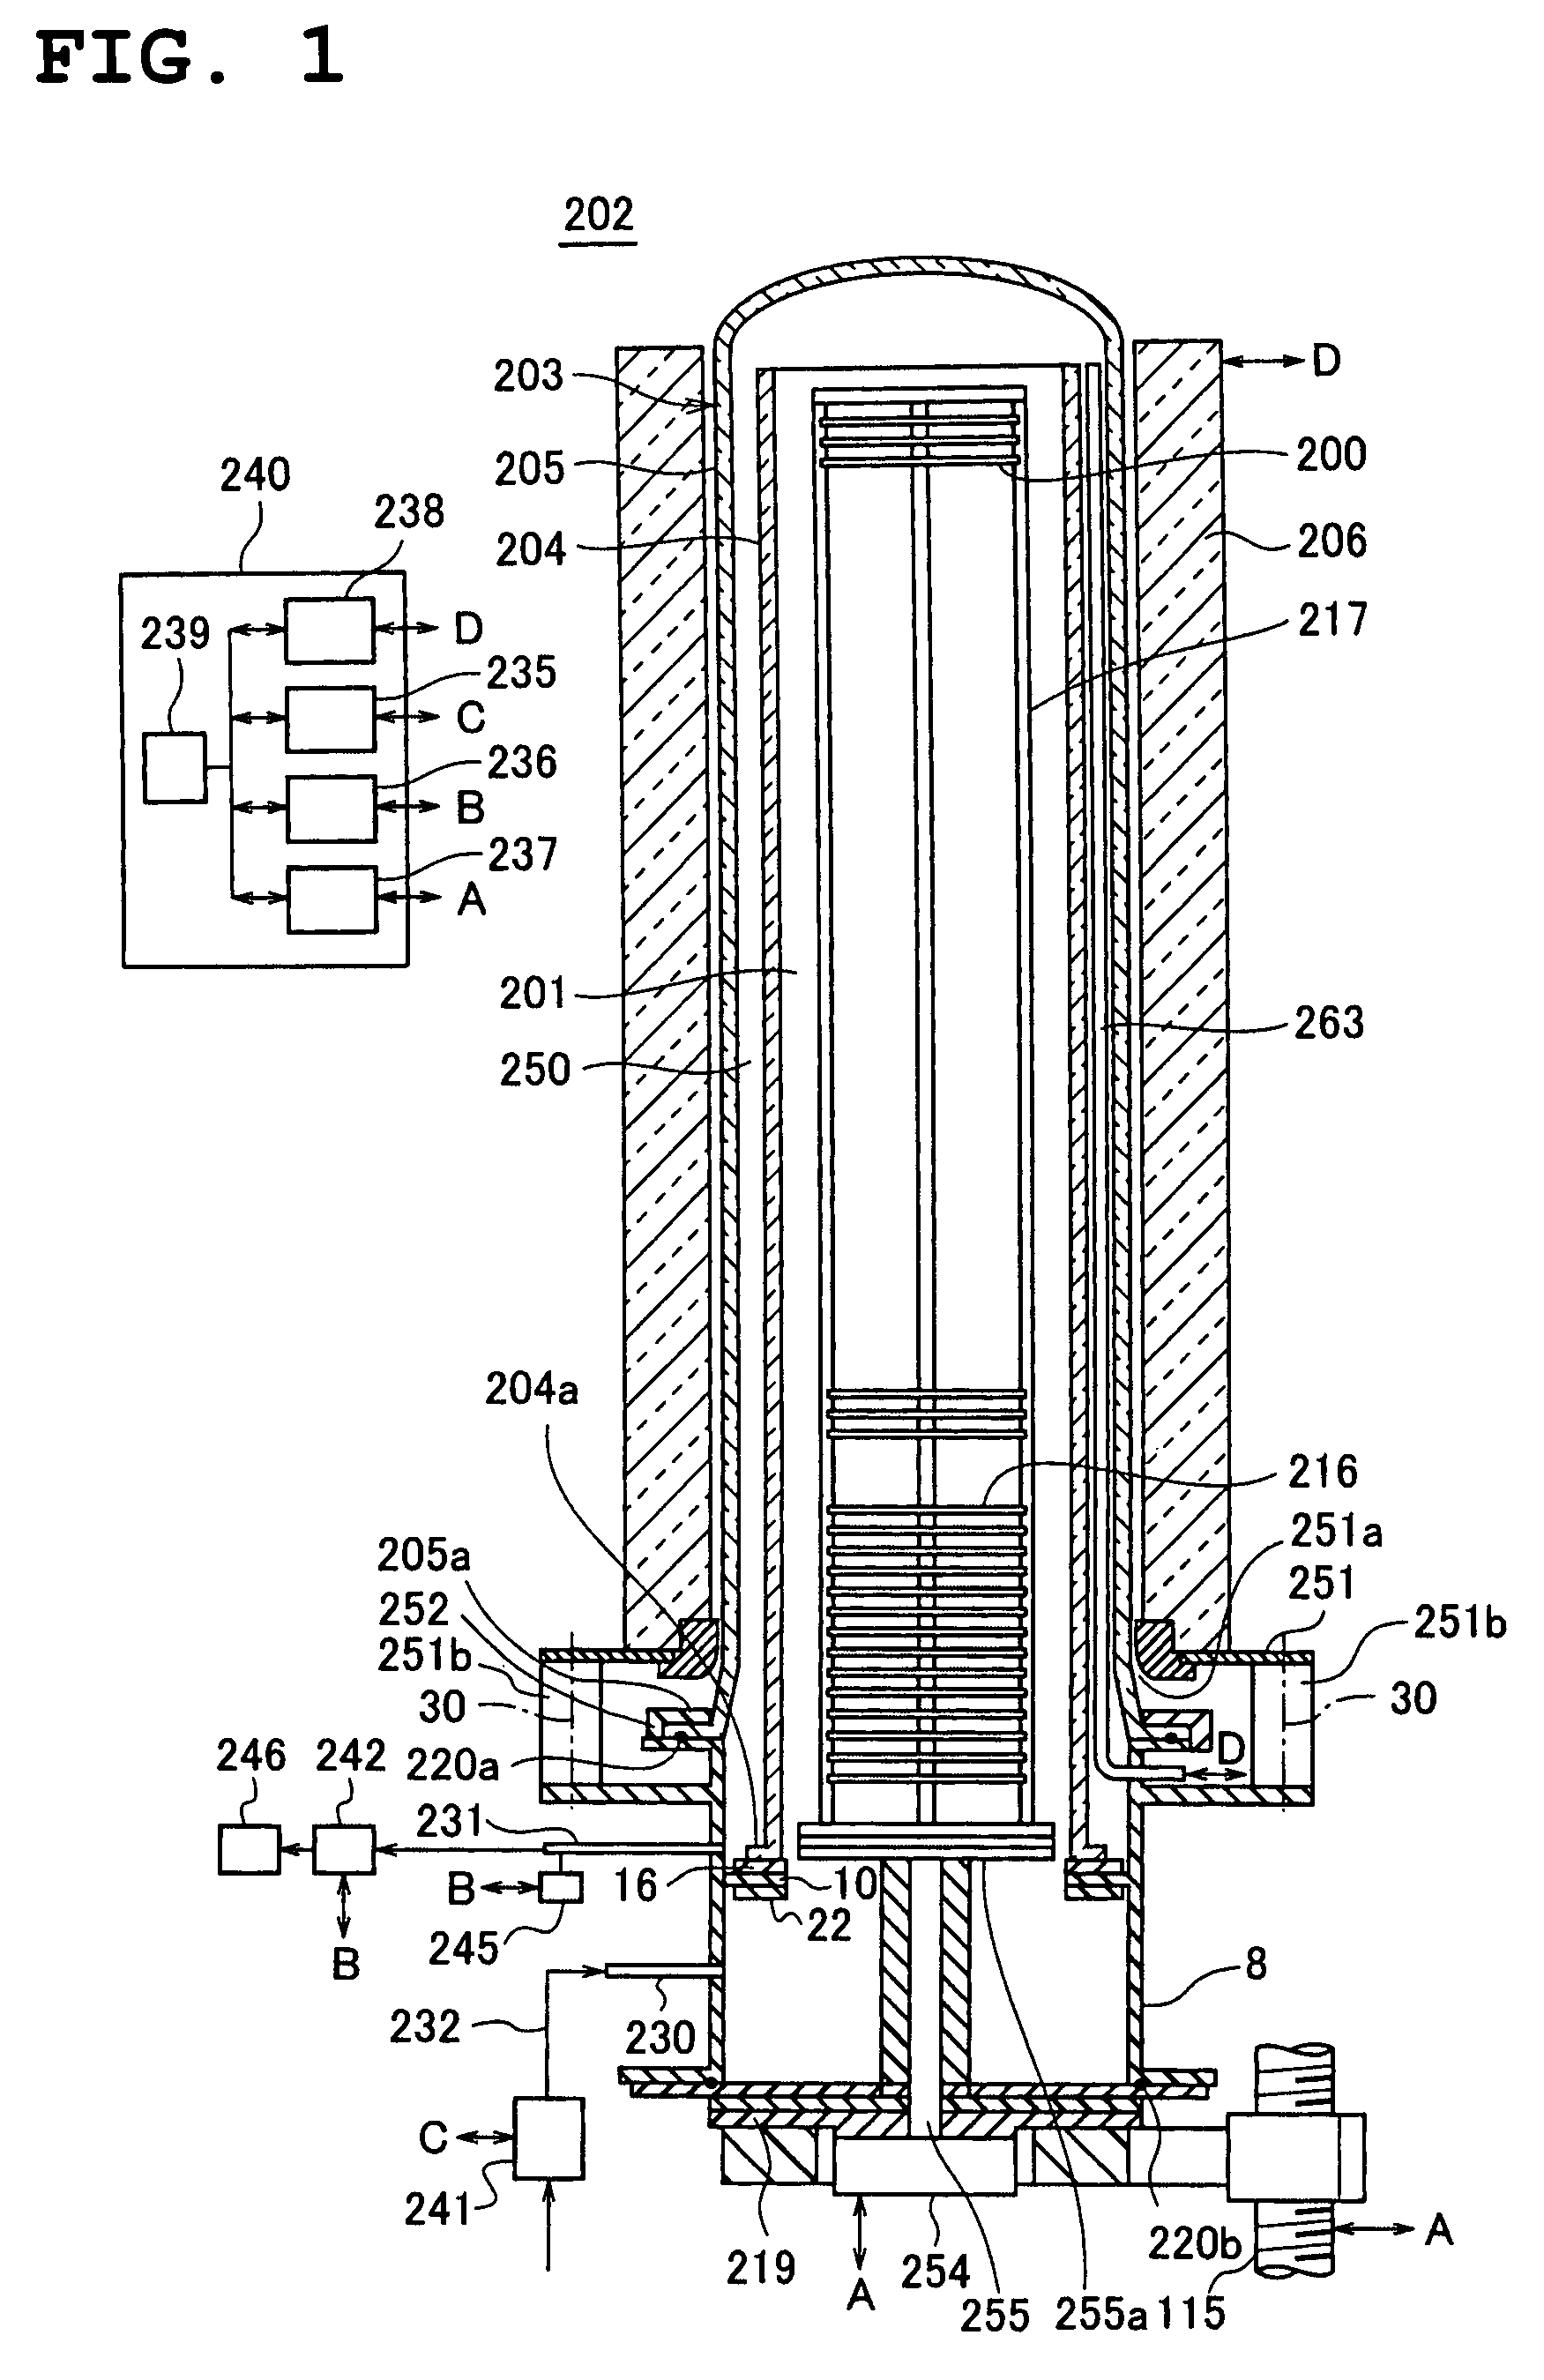 Substrate processing apparatus, method of manufacturing a semiconductor device, and method of forming a thin film on metal surface